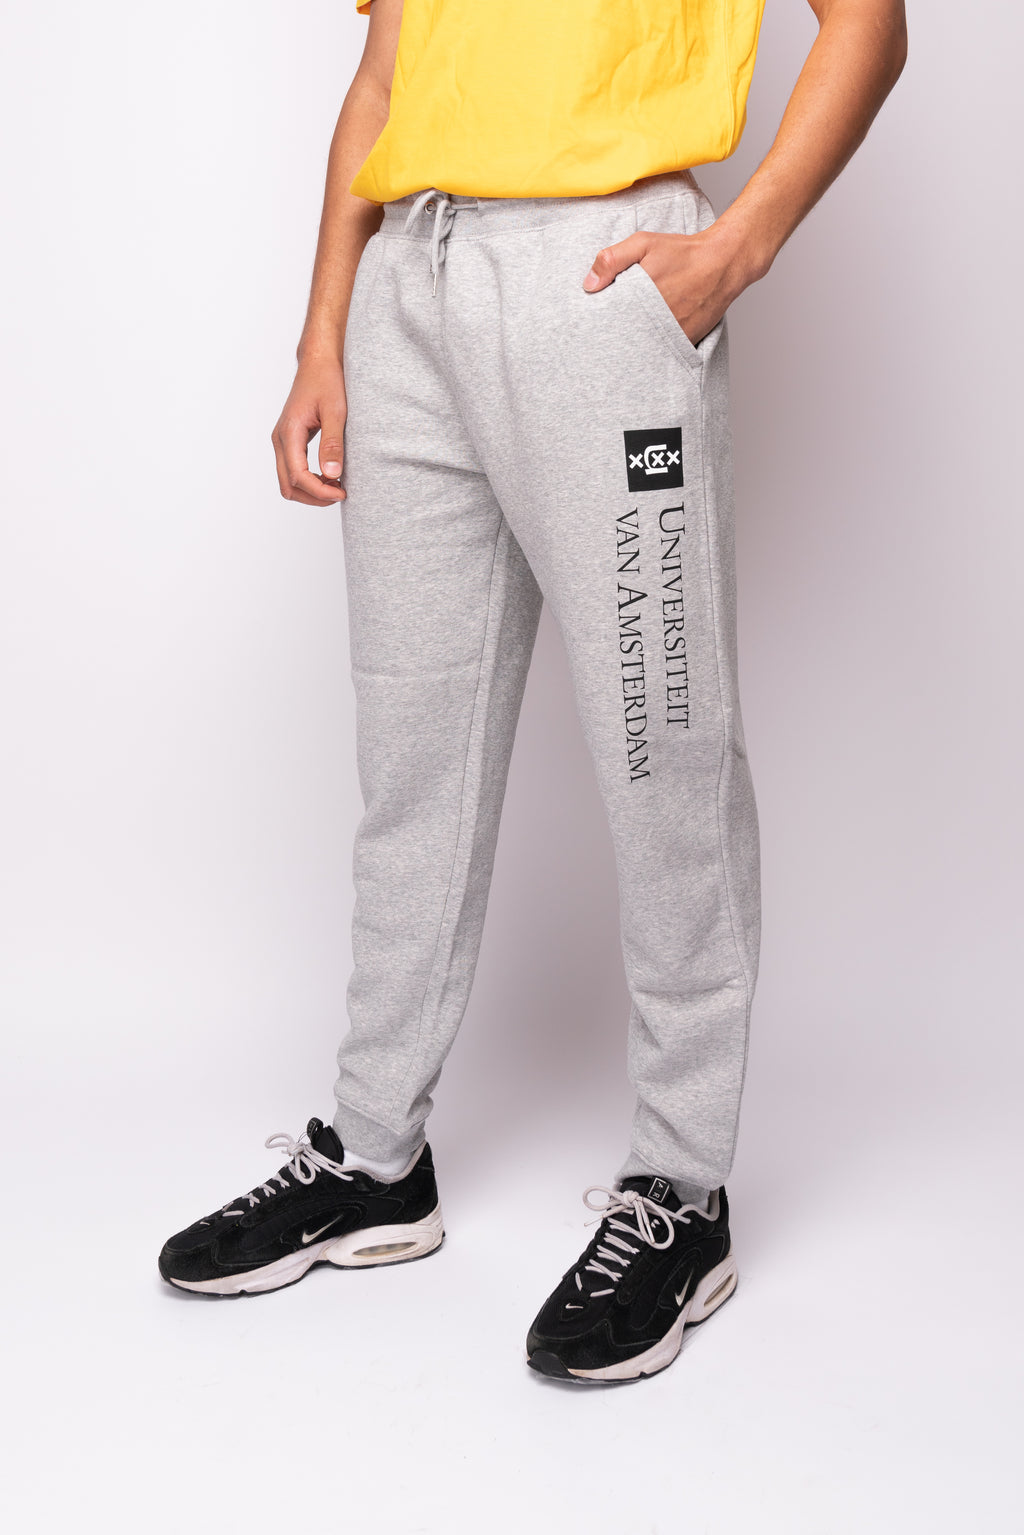 Sweatpants Unisex with the University of Amsterdam logo in gray